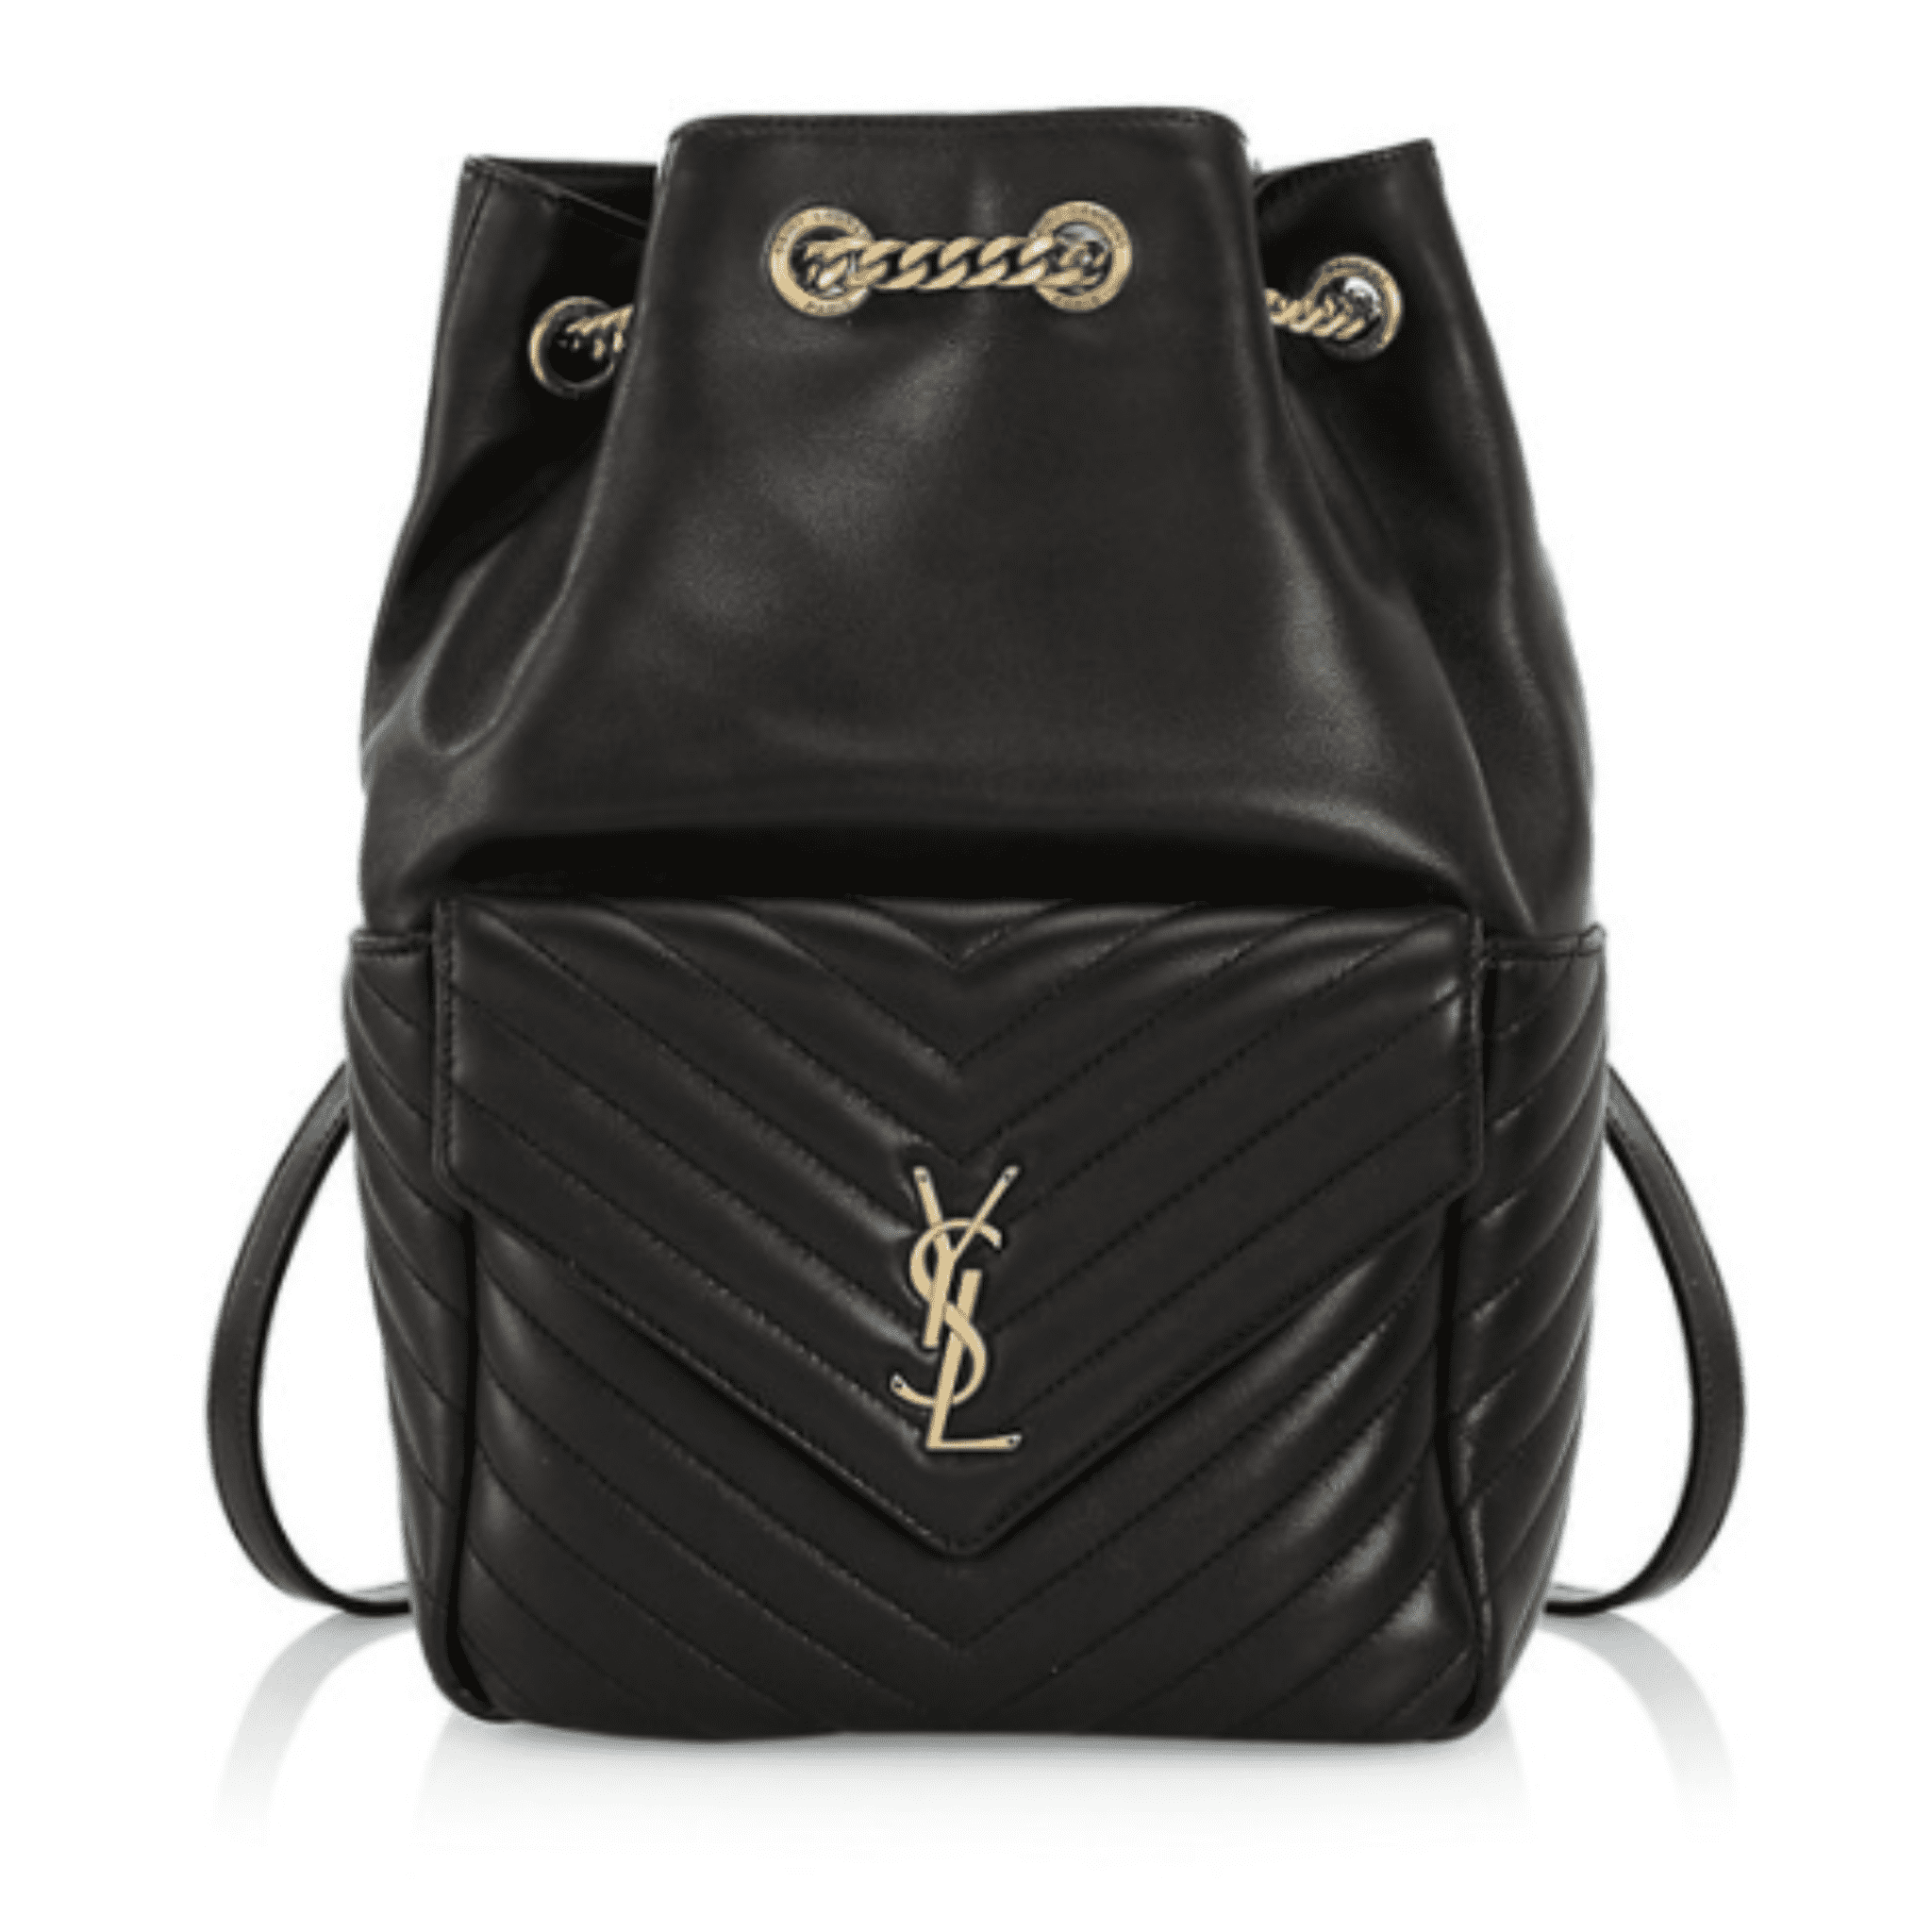 Black YSL Backpack with gold metal.